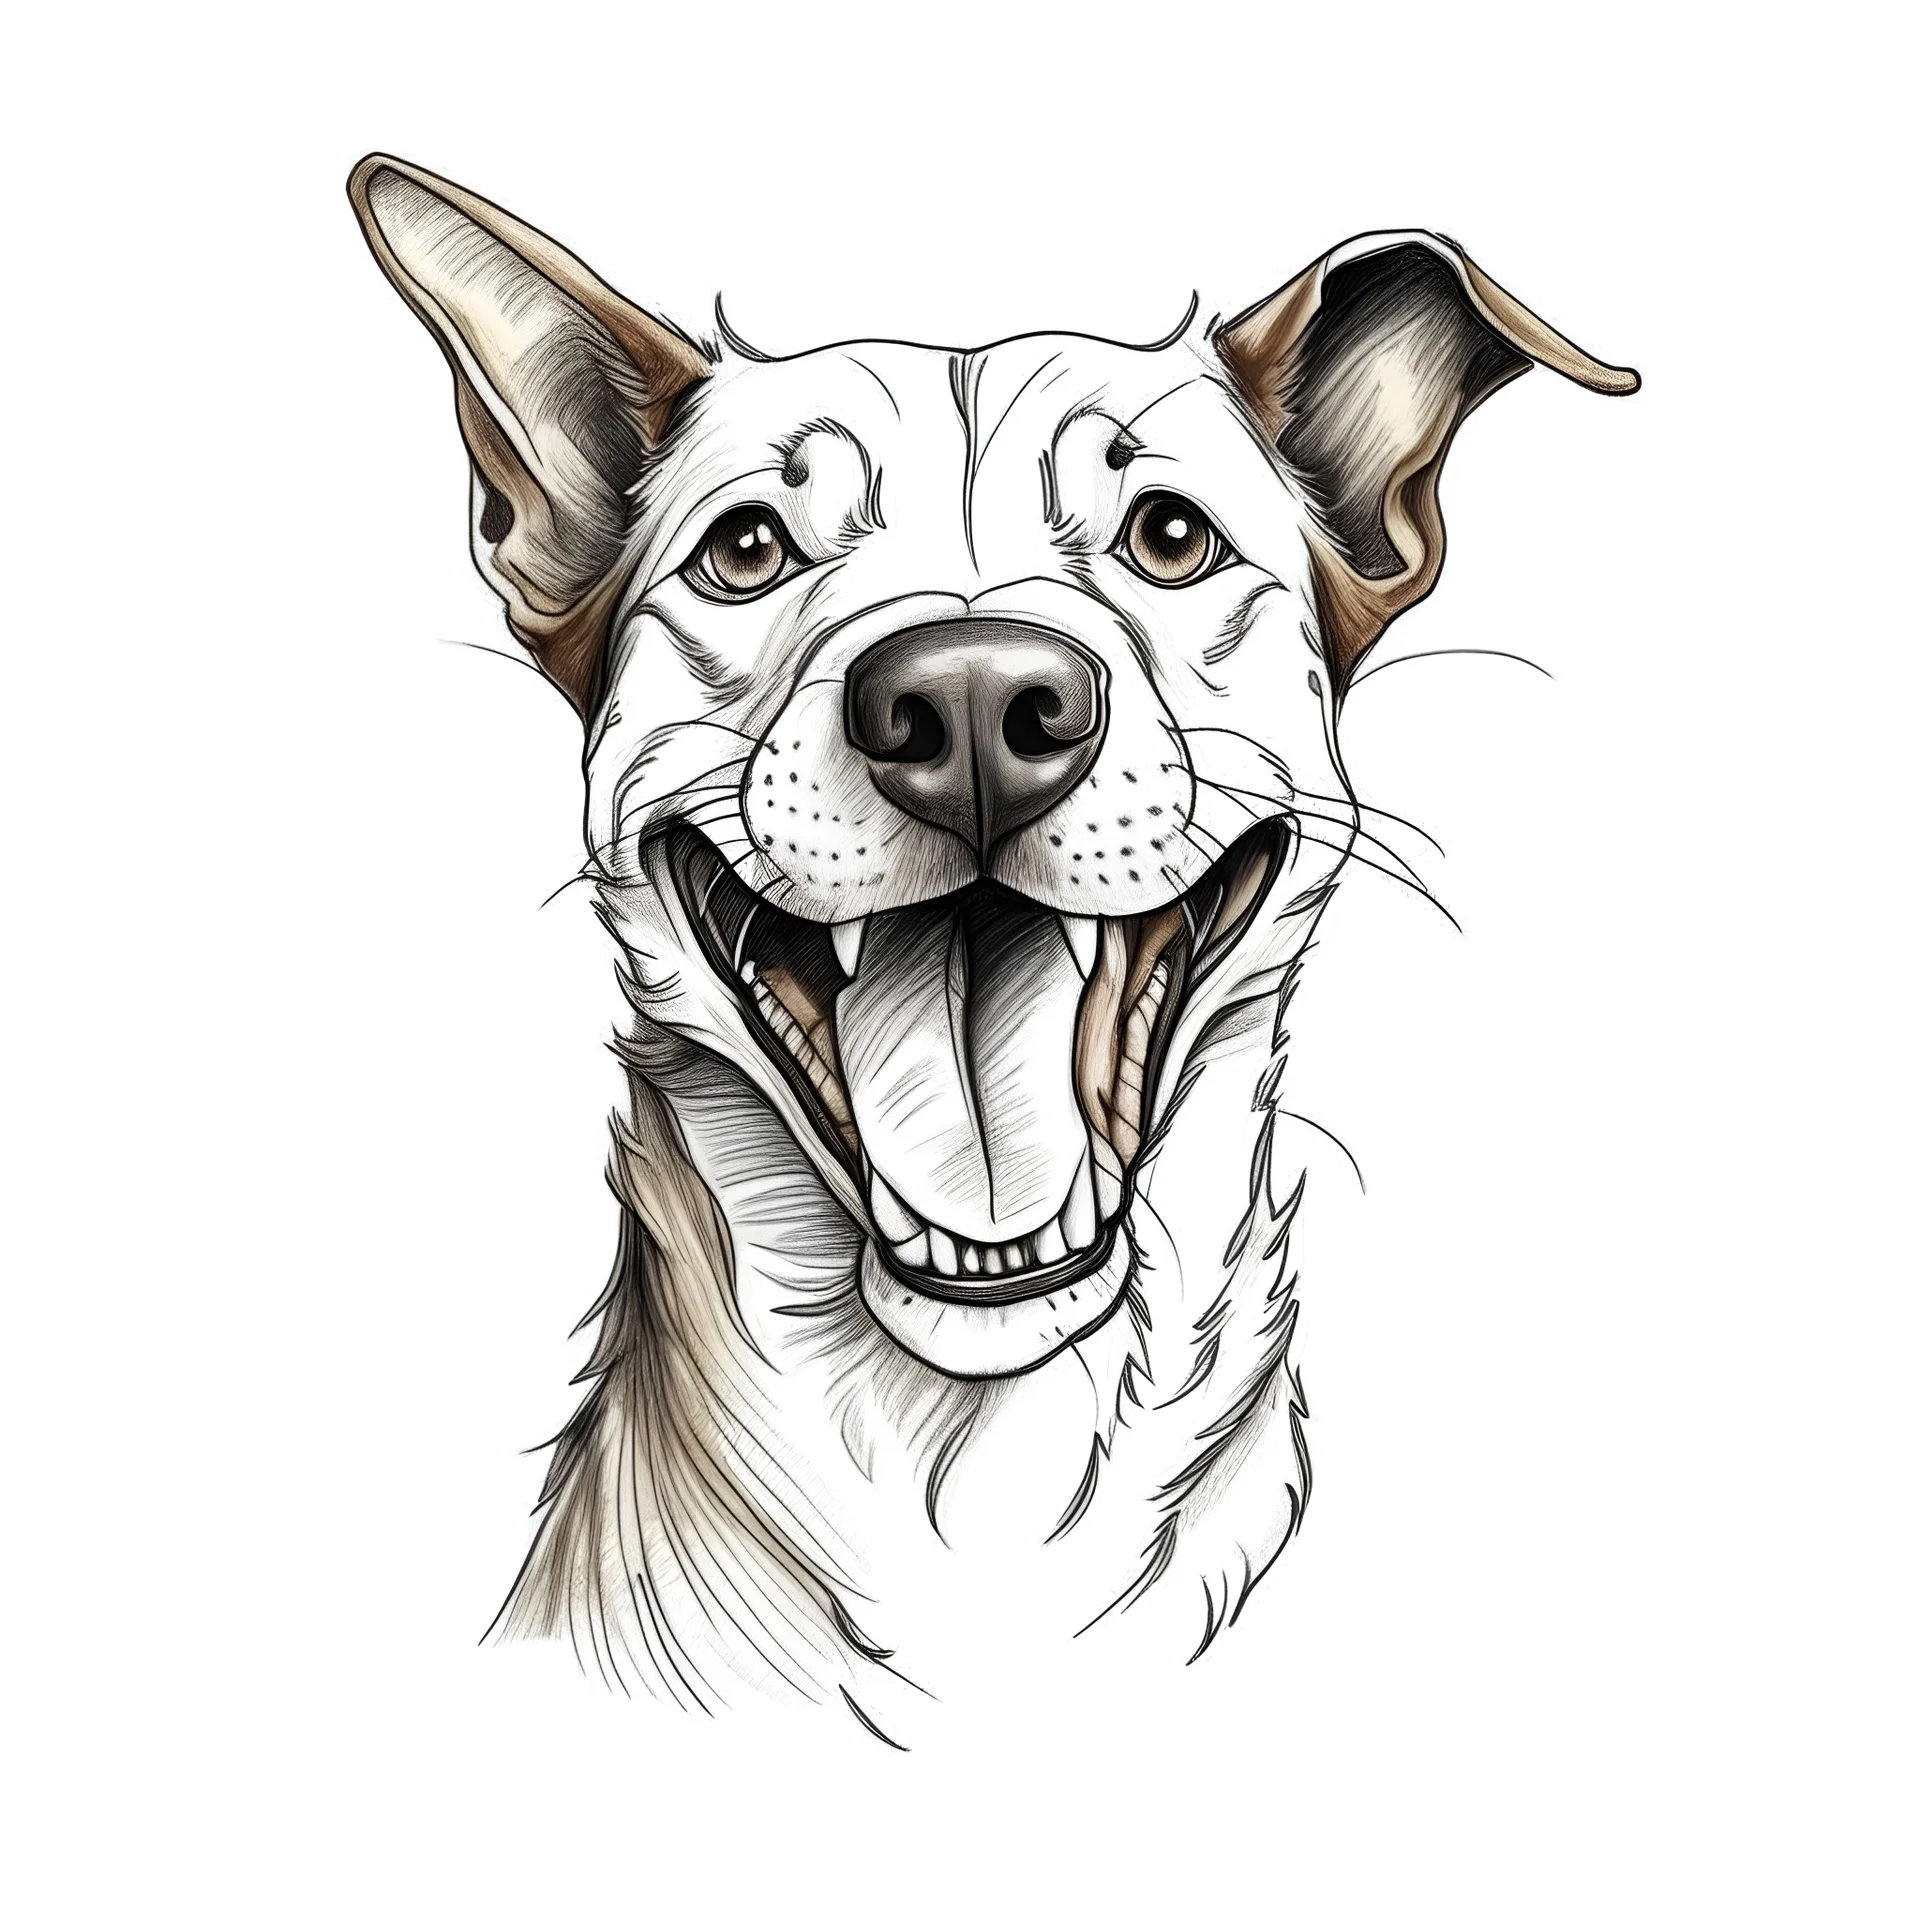 A pencil-drawn dog's head with an open mouth on a transparent background